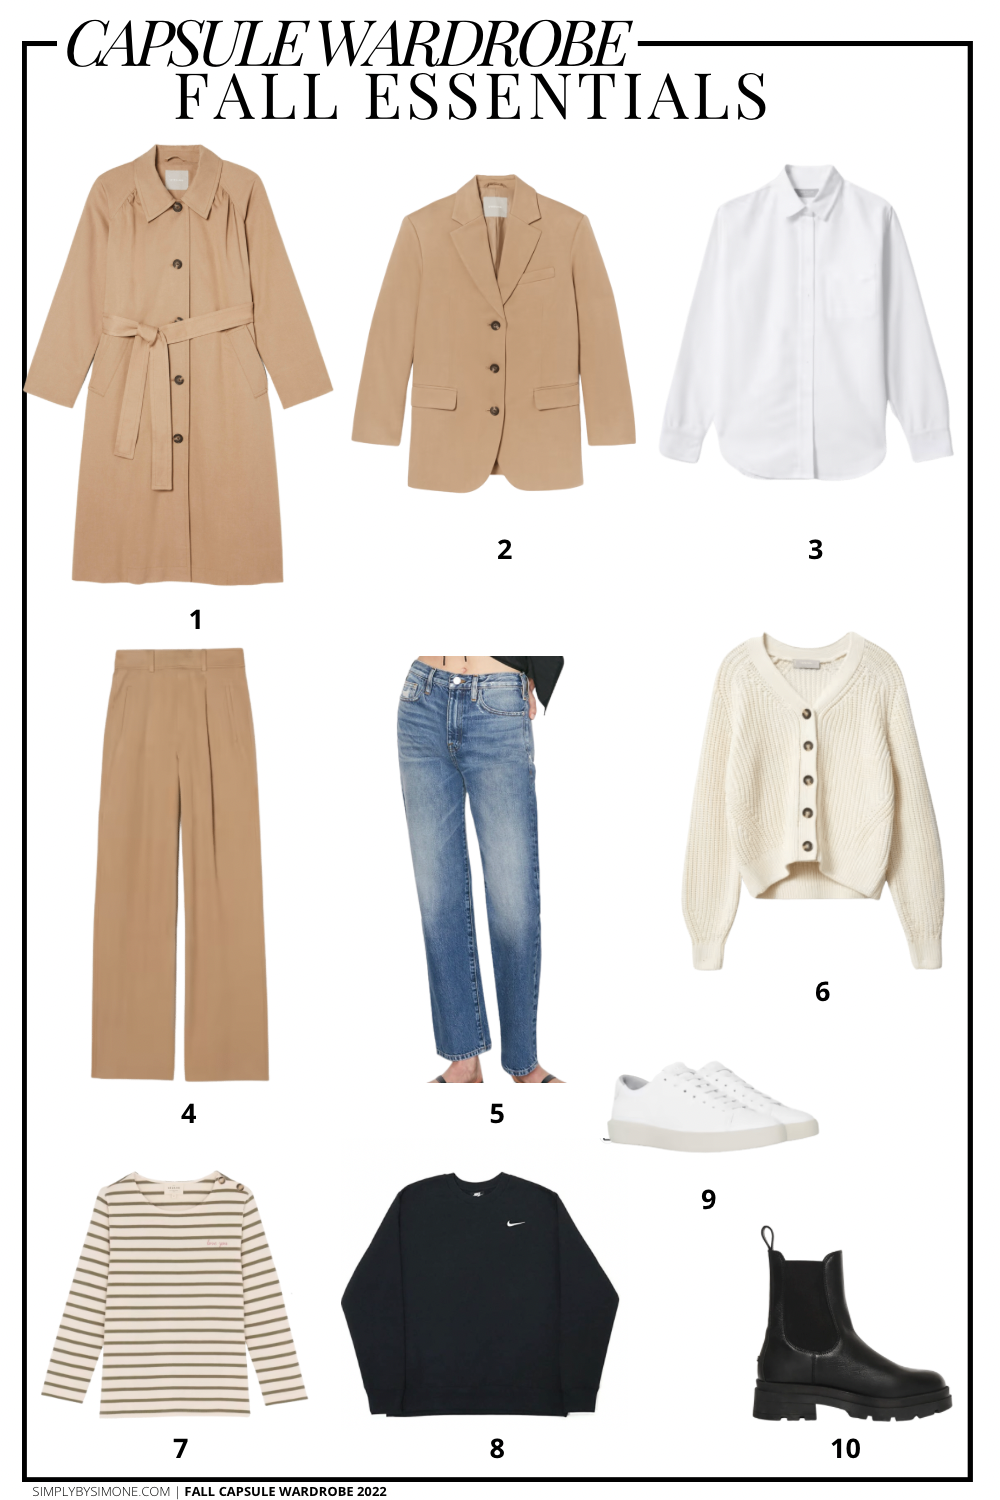 Fall Fashion: 10 Fall Closet Staples from